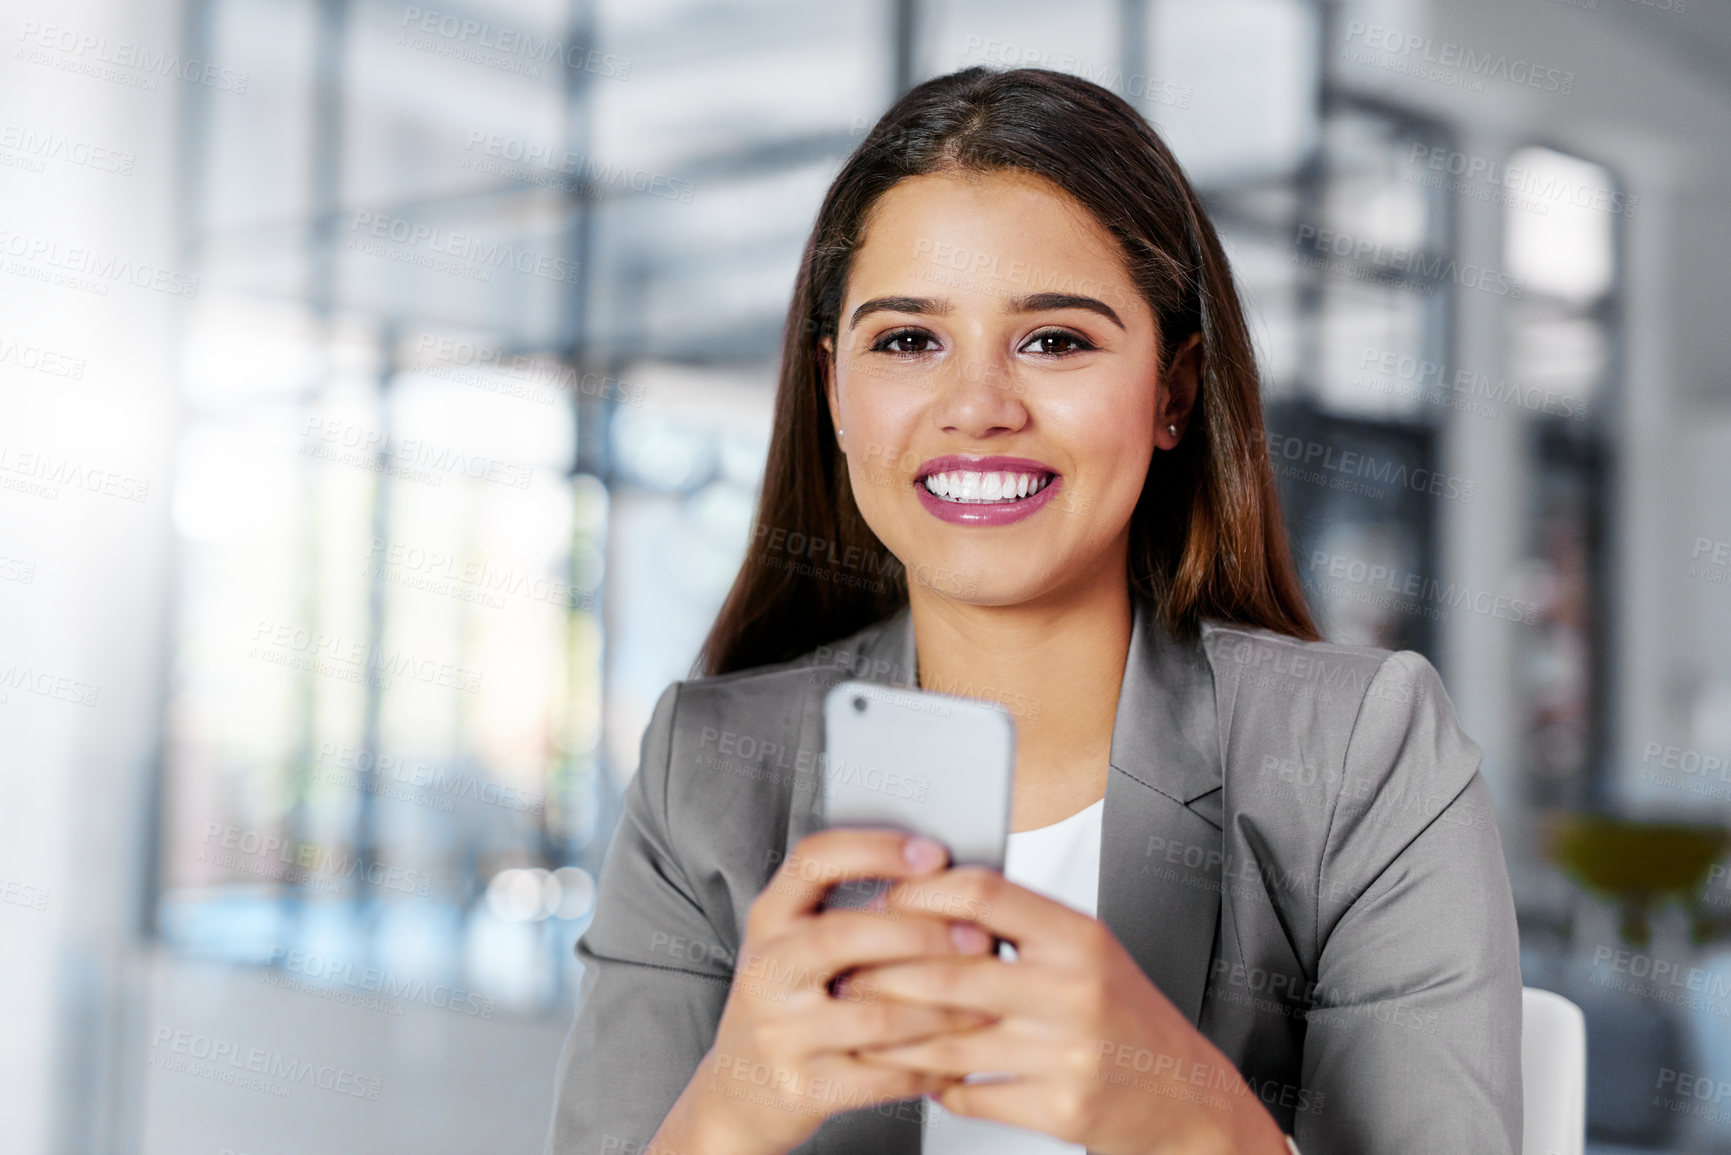 Buy stock photo Cropped portrait of a young businesswoman texting on a cellphone in an office